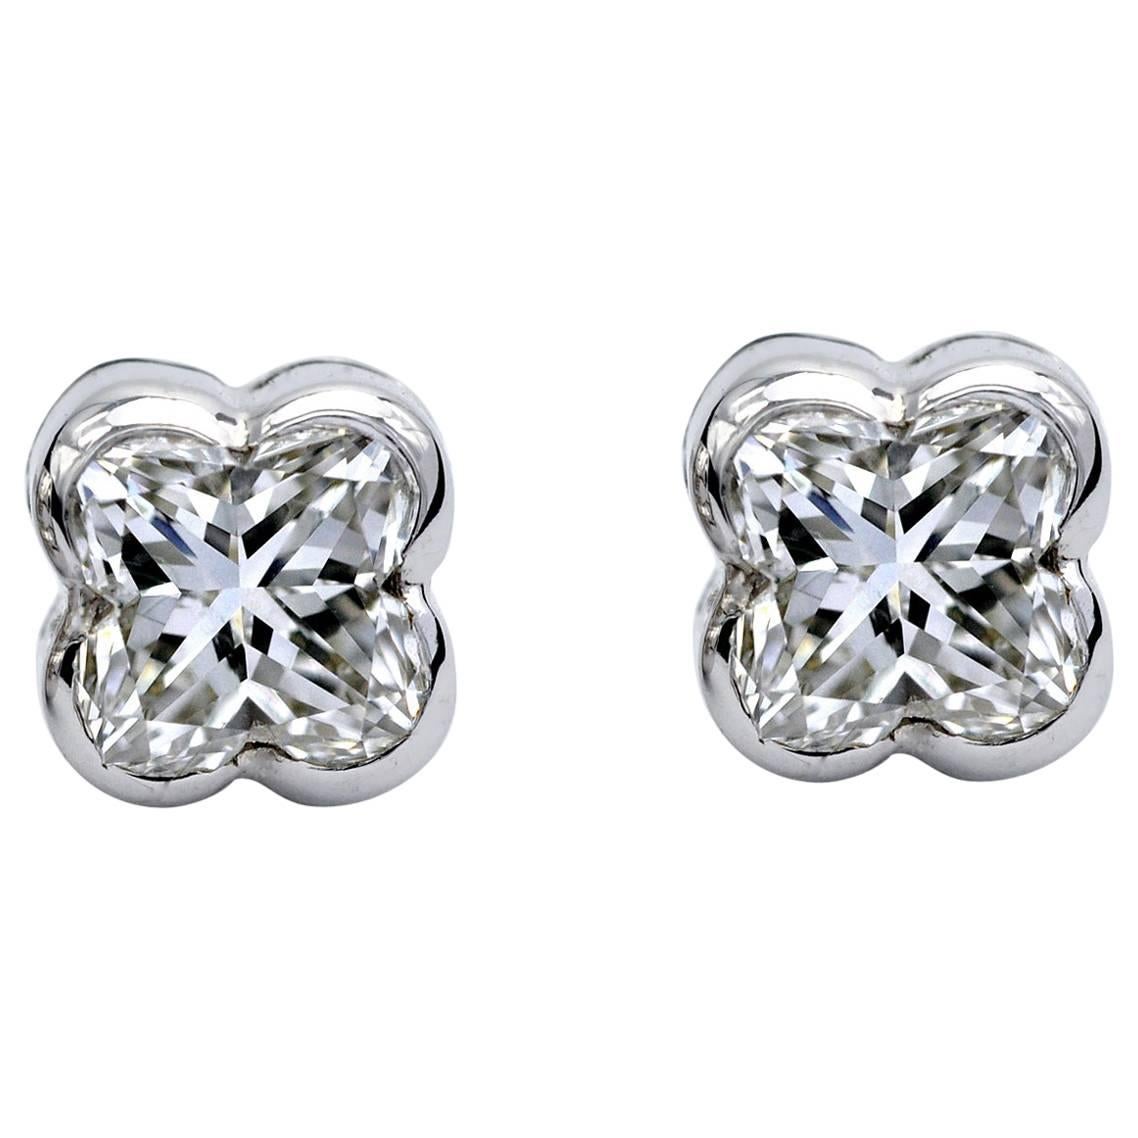 Amazing Lily Cut Diamond  bezel set in hand made 18 karat white gold ear Studs. outstanding yet timeless...
The make is excellent with high attention to details. Come with the renown  Alpa℗ closing system... the most  secure one !
Diamond Total